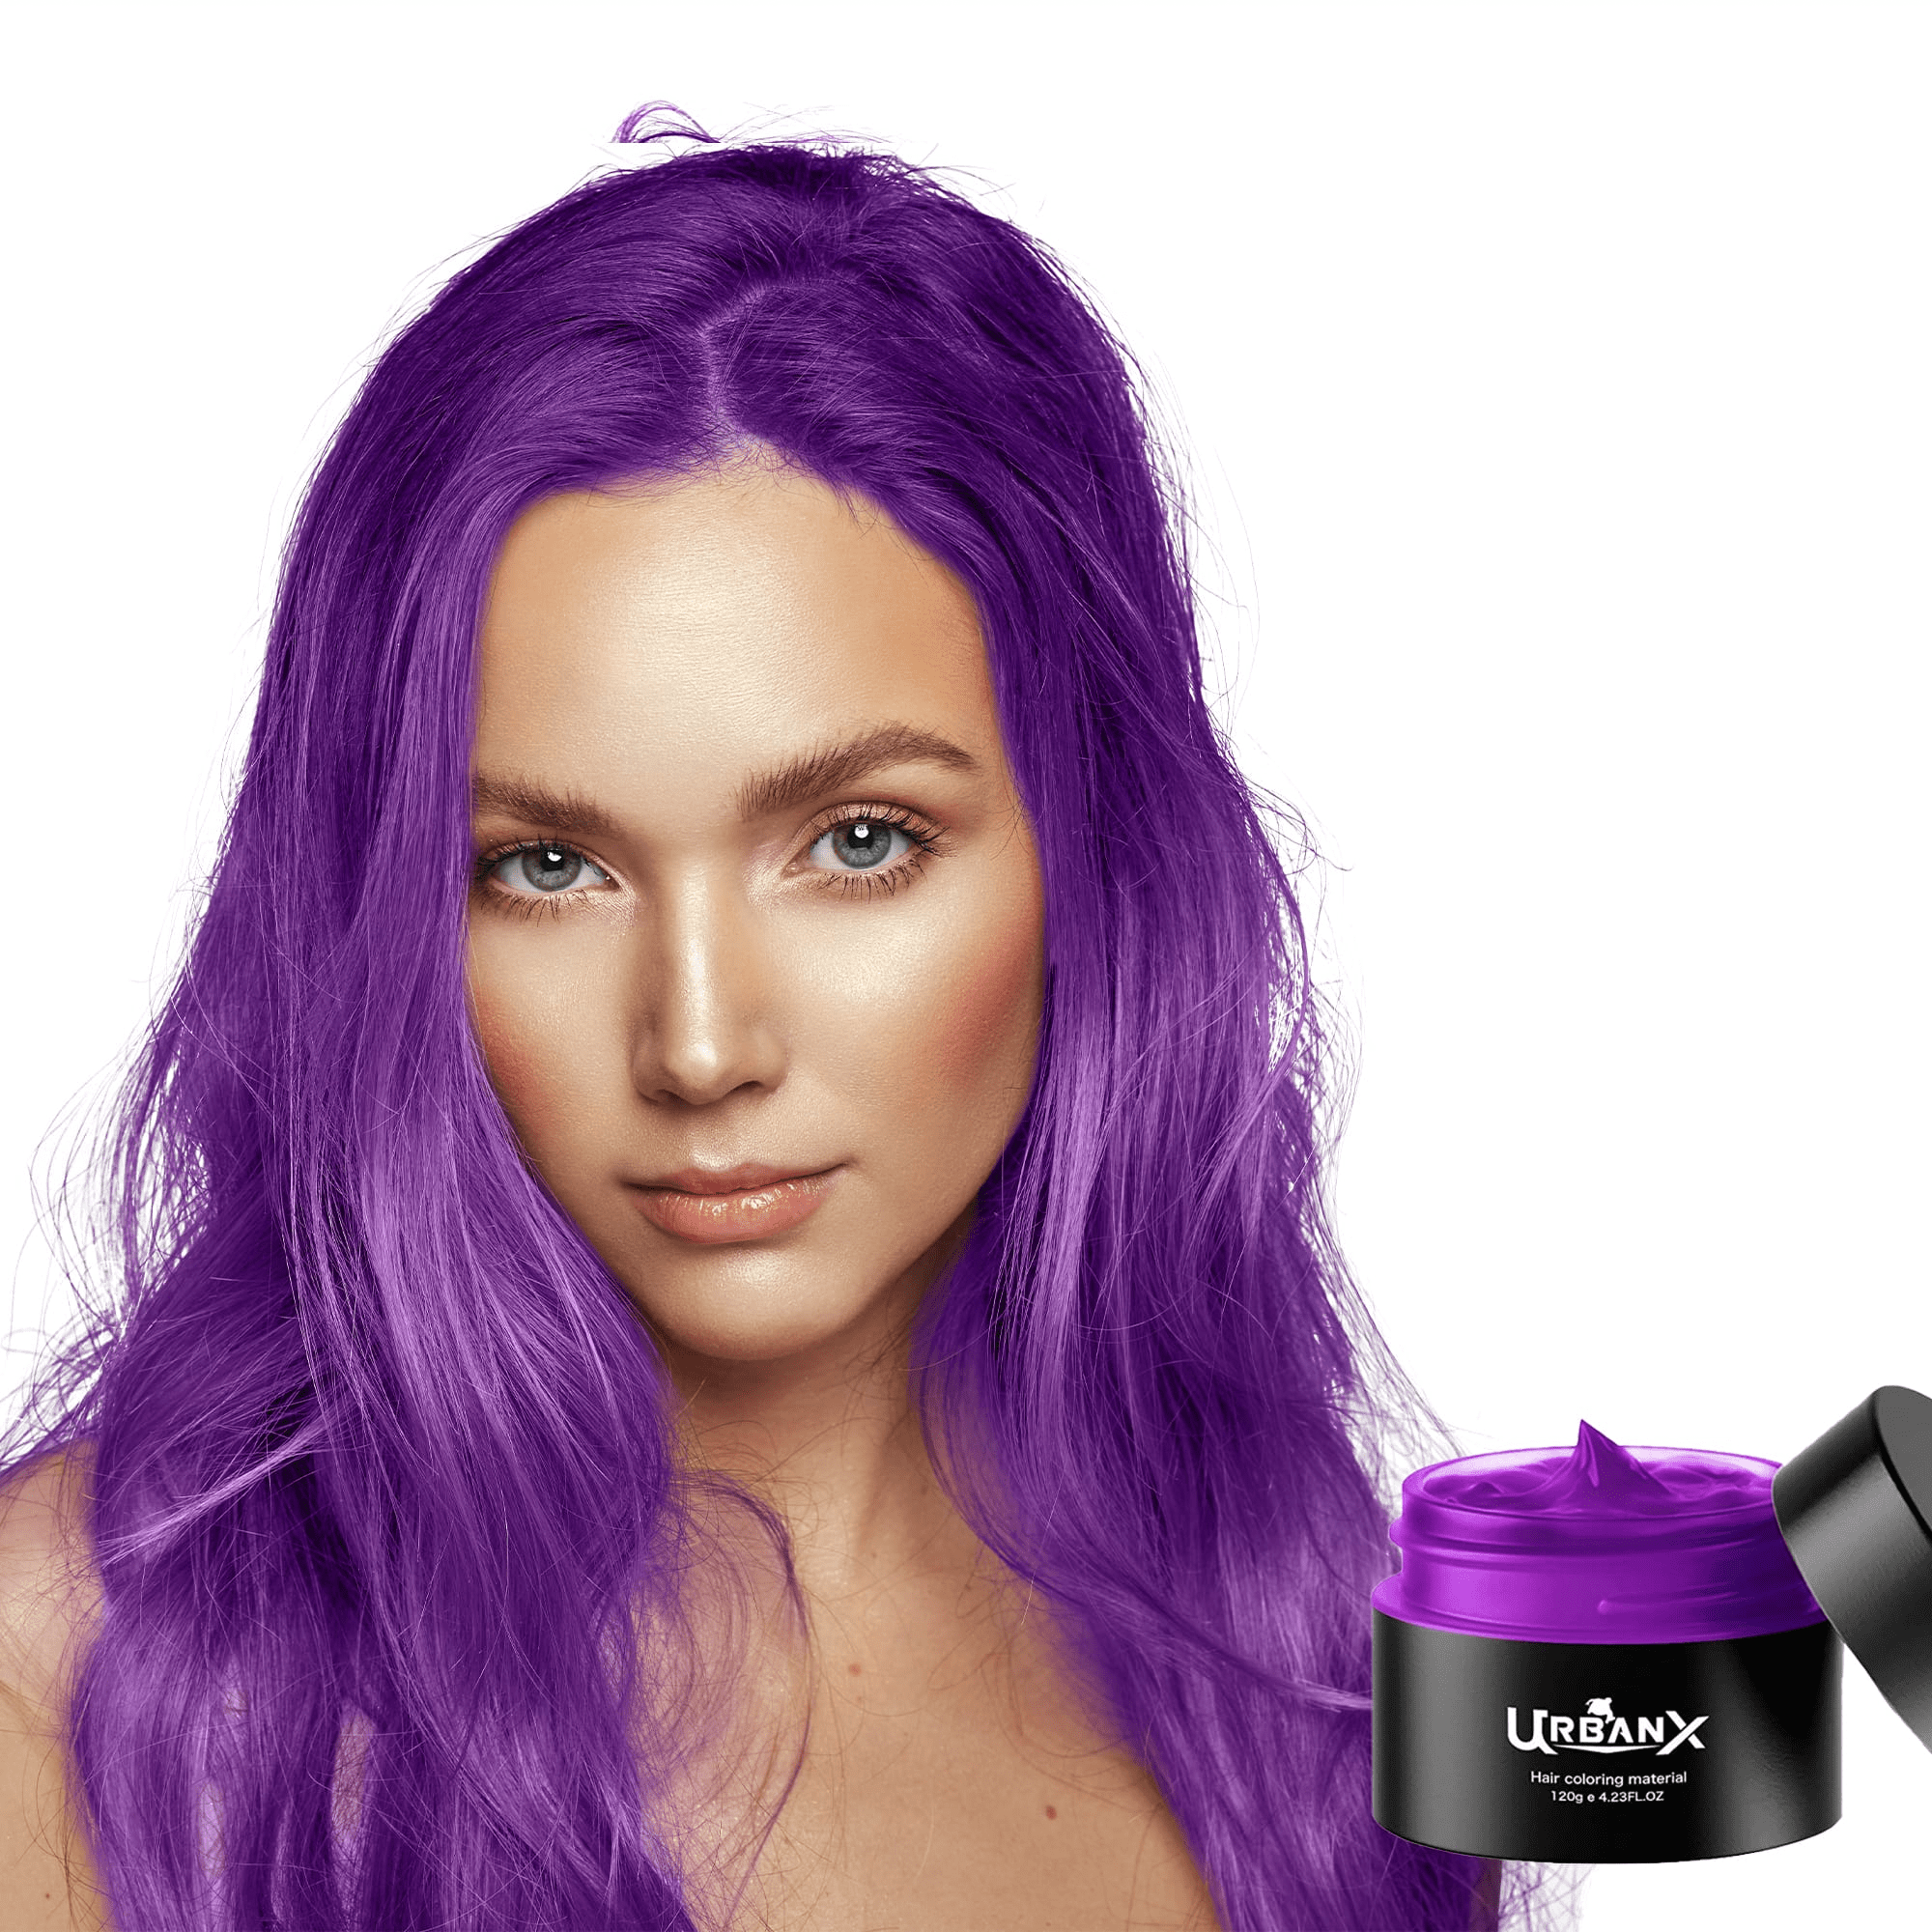 UrbanX Washable Hair Coloring Wax Material Unisex Color Dye Styling Cream  Natural Hairstyle for Mohawk Hair Cut Pomade Temporary Party Cosplay  Natural Ingredients - Purple 